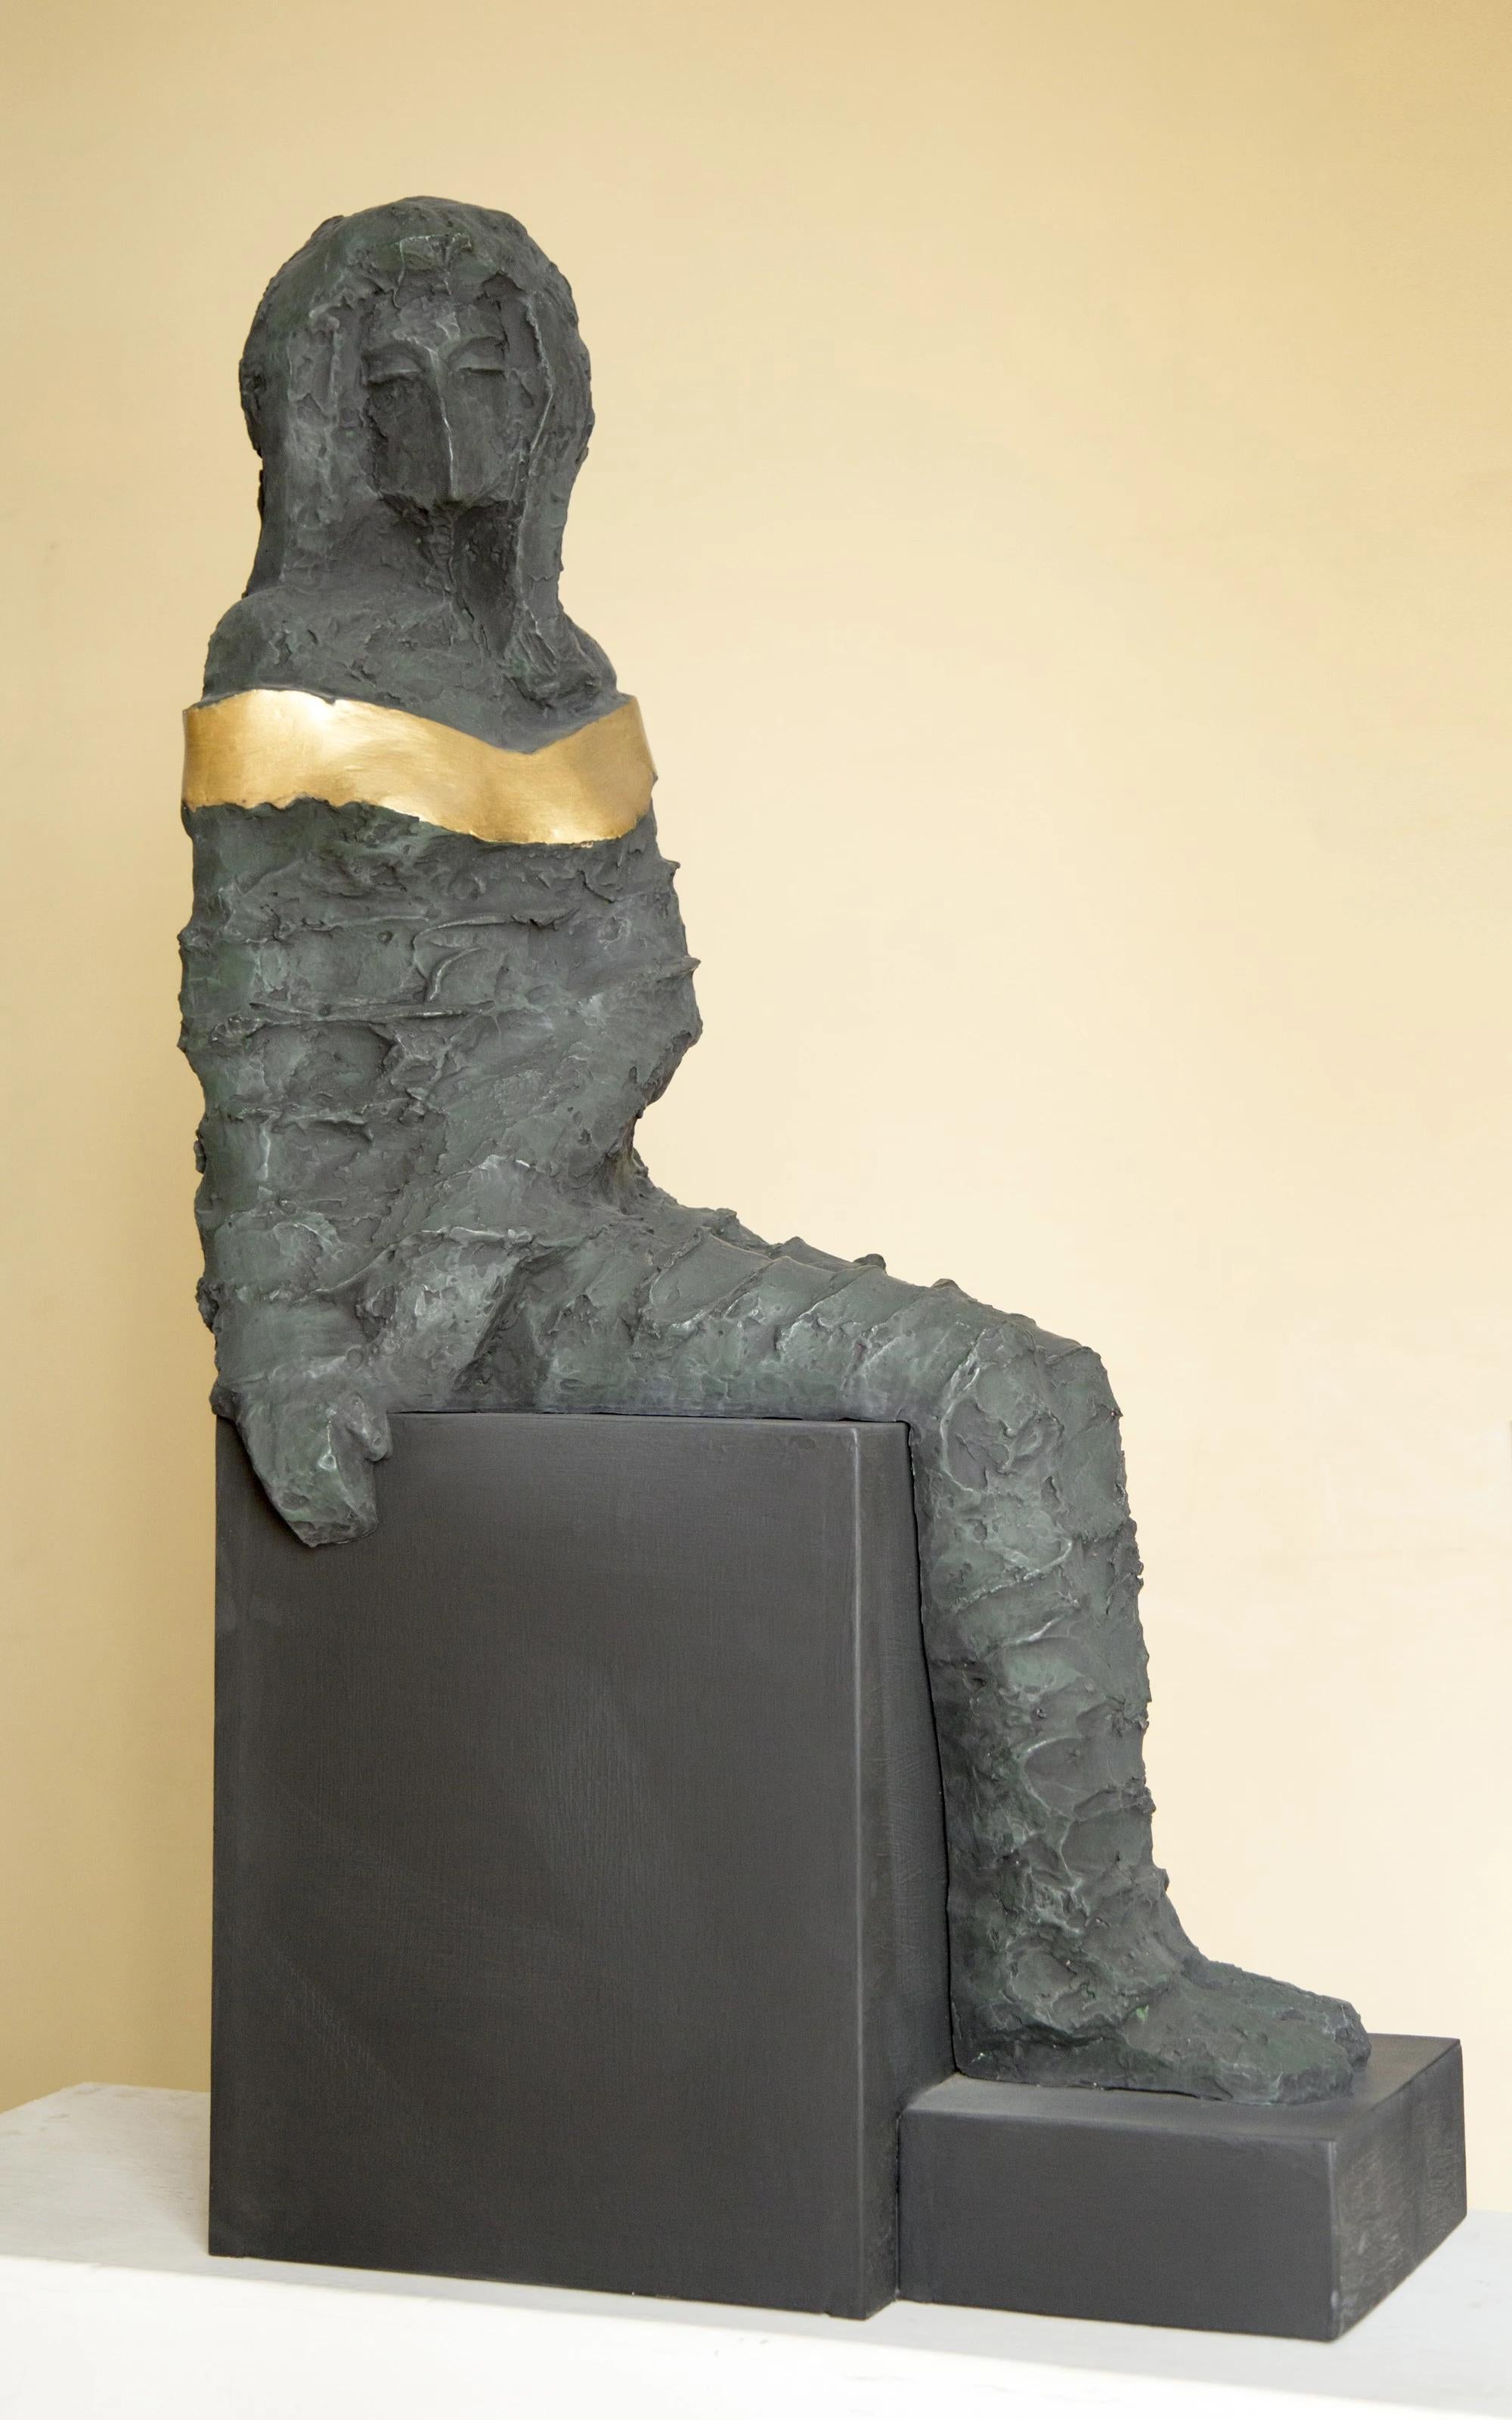 "Meditation" Bronze Sculpture 27" x 10" x 19" inch by Sarkis Tossonian

Sarkis Tossoonian was born in Alexandria in 1953. He graduated from the Faculty of Fine Arts/Sculpture in 1979. He started exhibiting in individual and group exhibitions in